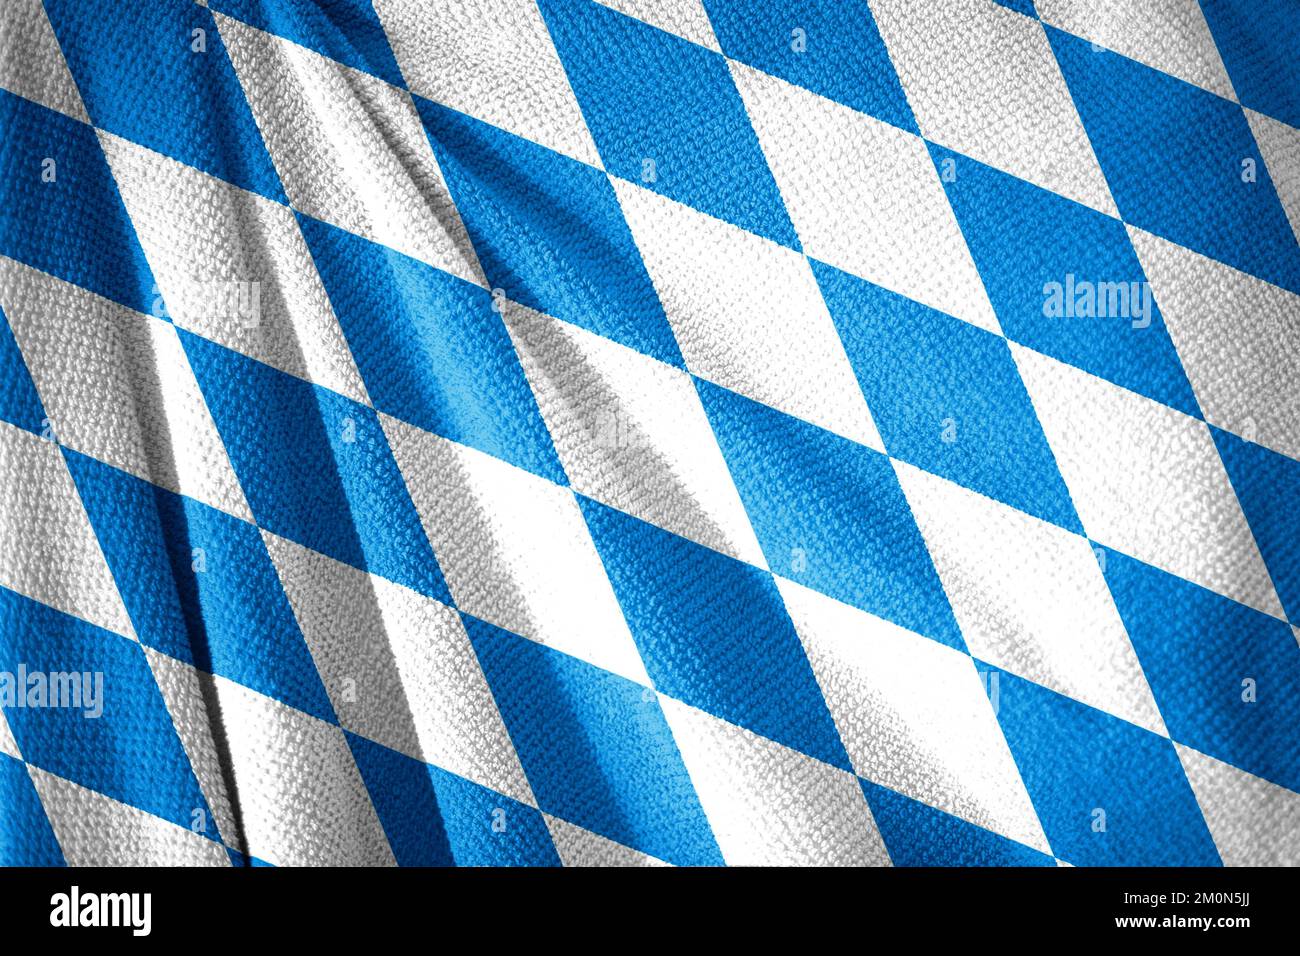 Bavaria state on towel surface illustration with, country symbol of Bayern Stock Photo